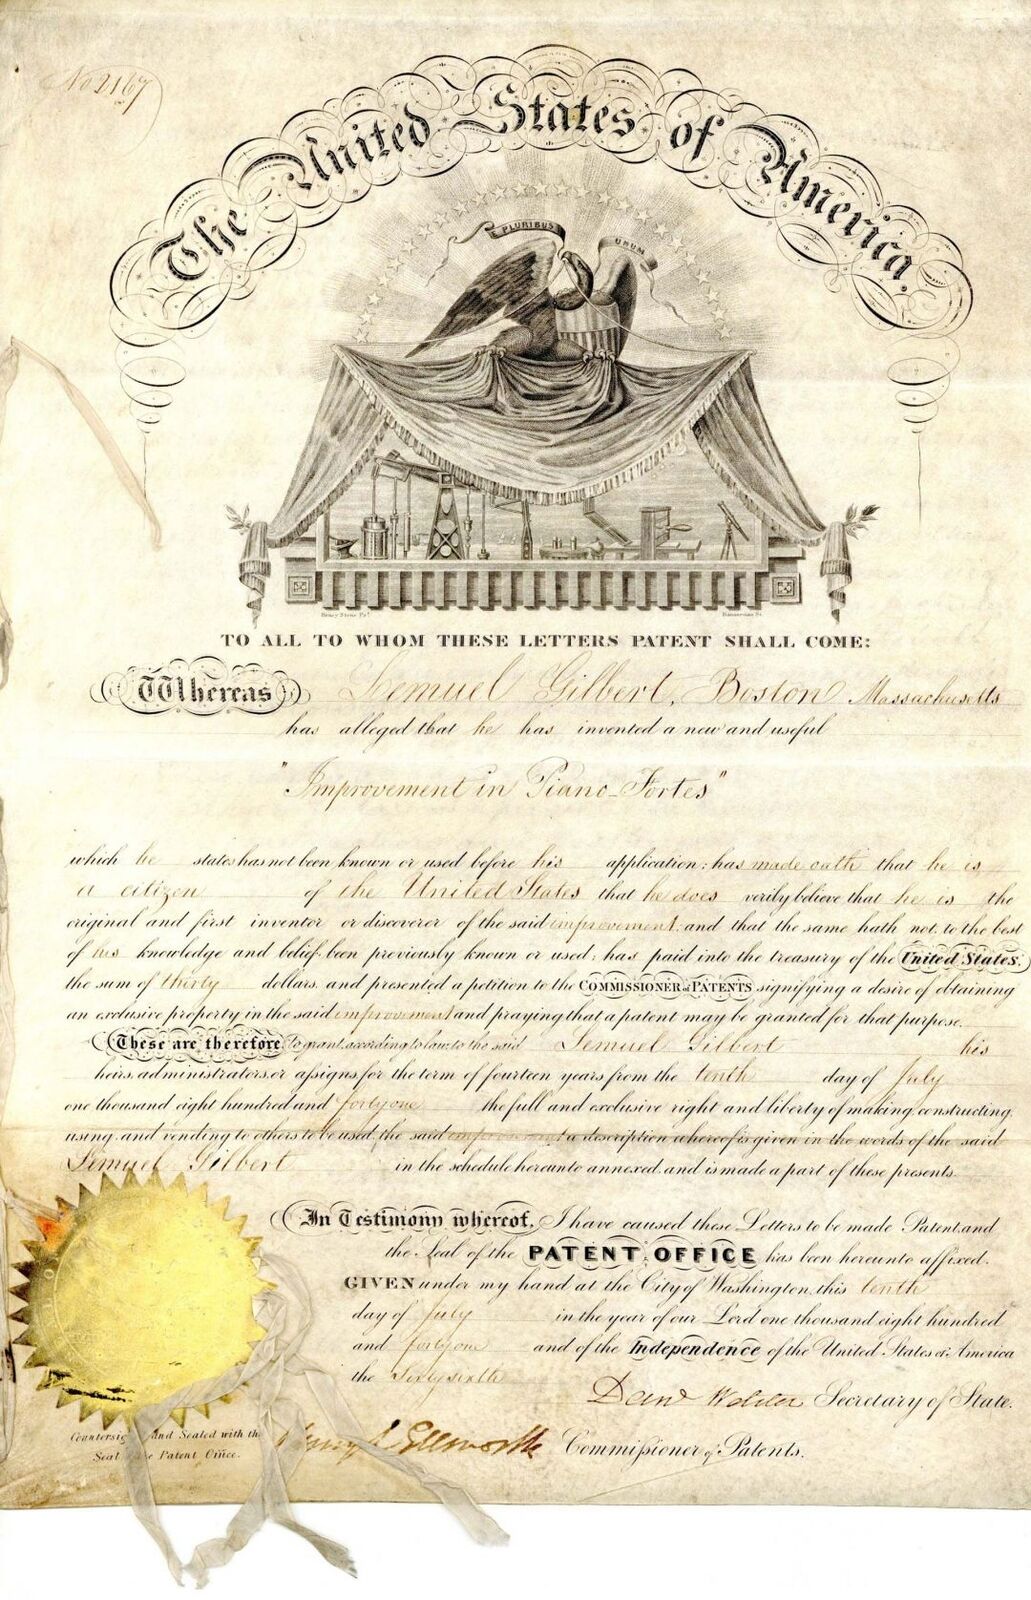 United States of America Patent signed by Daniel Webster - Autographs - Autograp